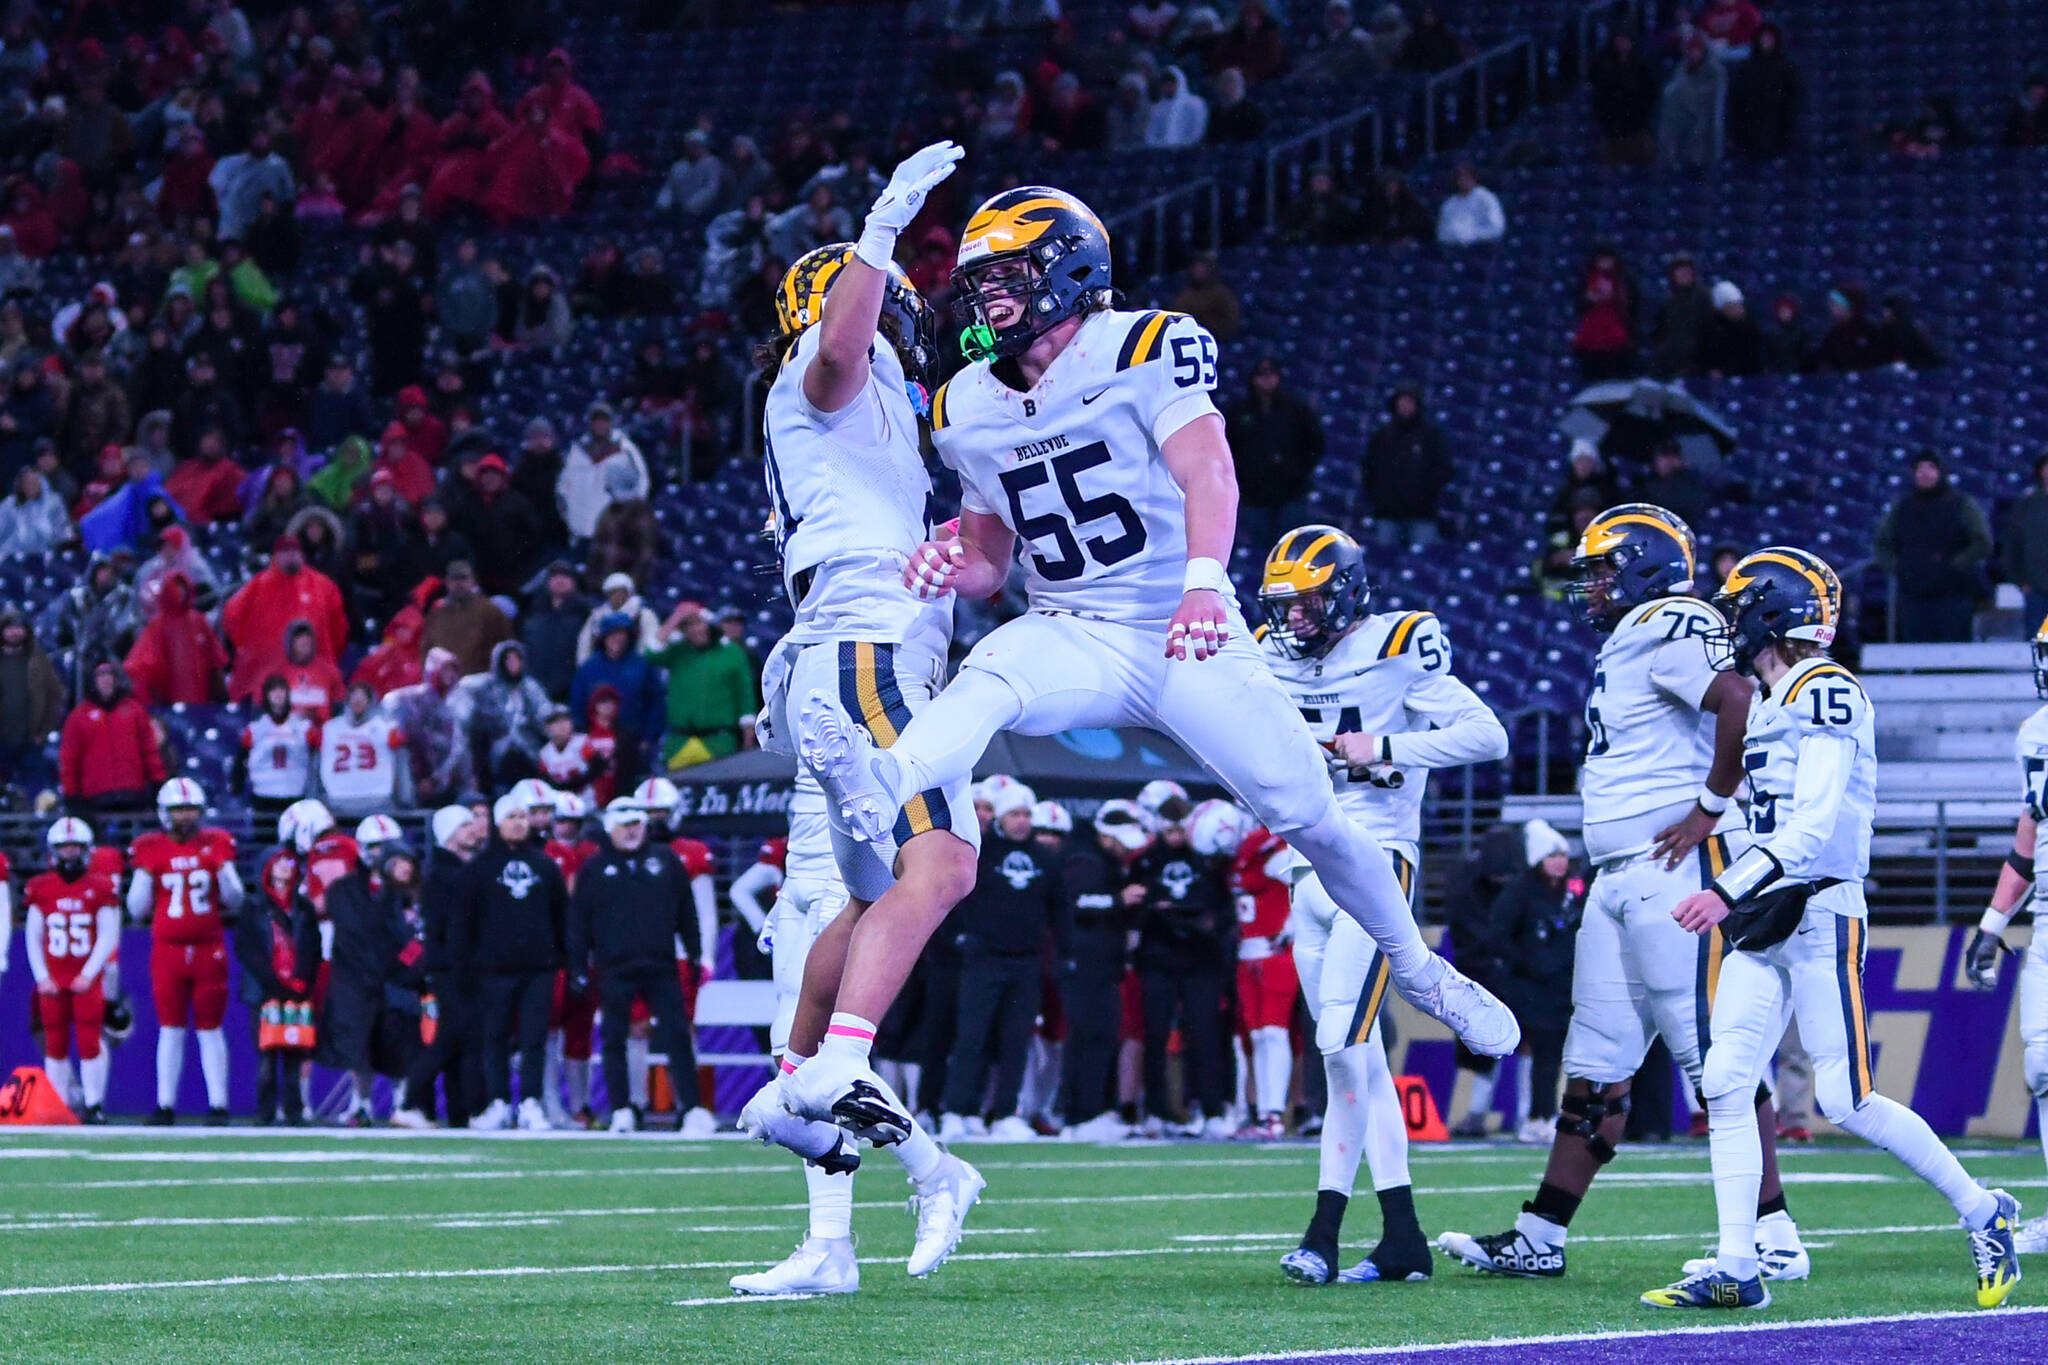 Bellevue’s Max Jones, left, and Ollie Sharp celebrate the Wolverines’ first touchdown. Photo courtesy of Stephanie Ault Justus